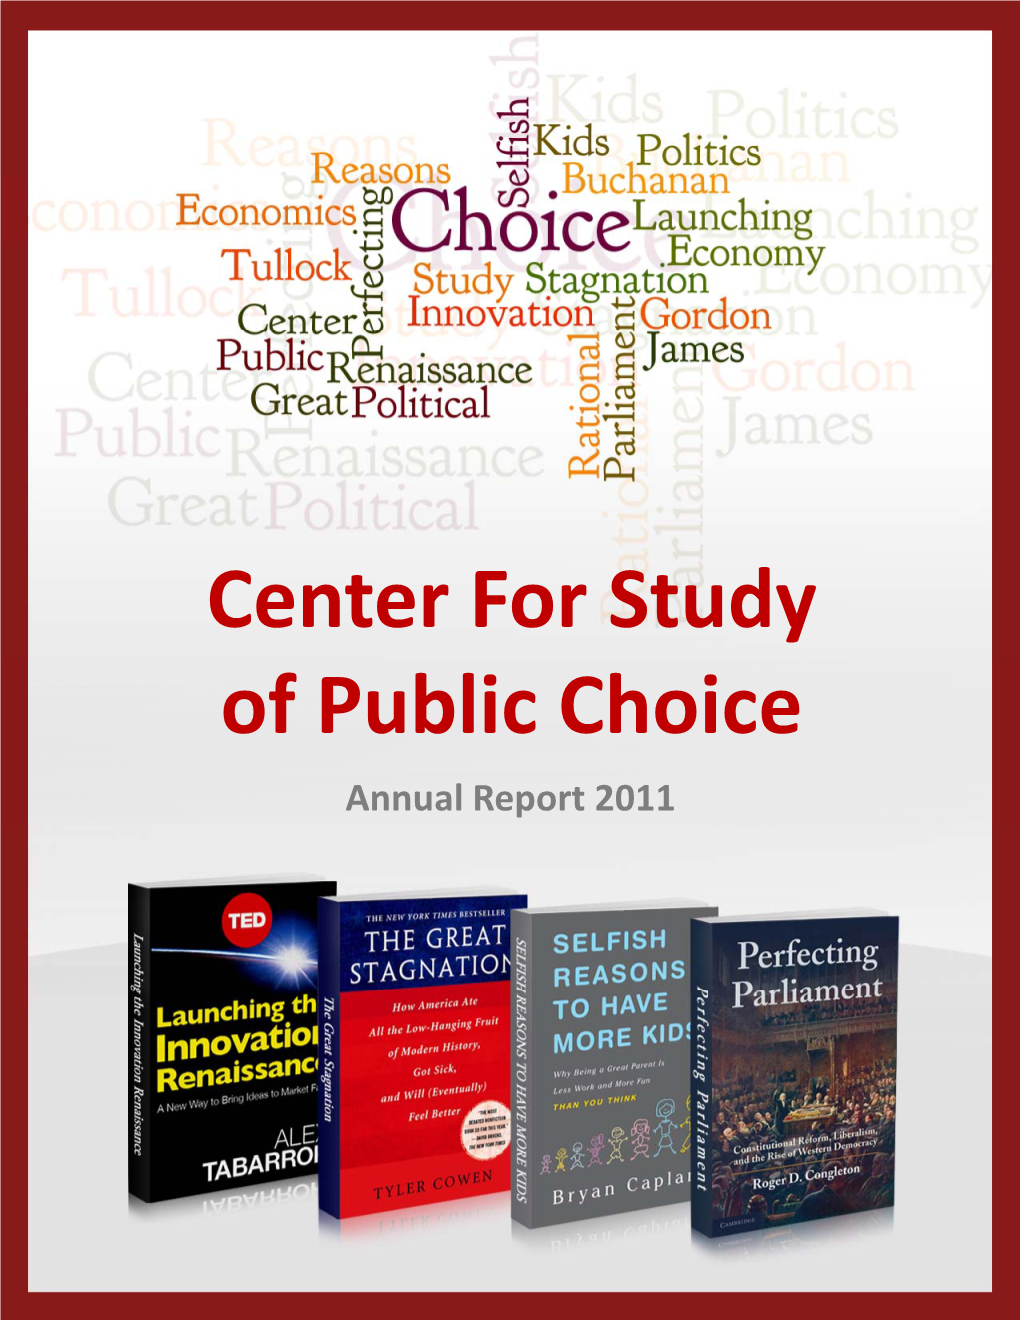 Center for Study of Public Choice Annual Report 2011 from the Director